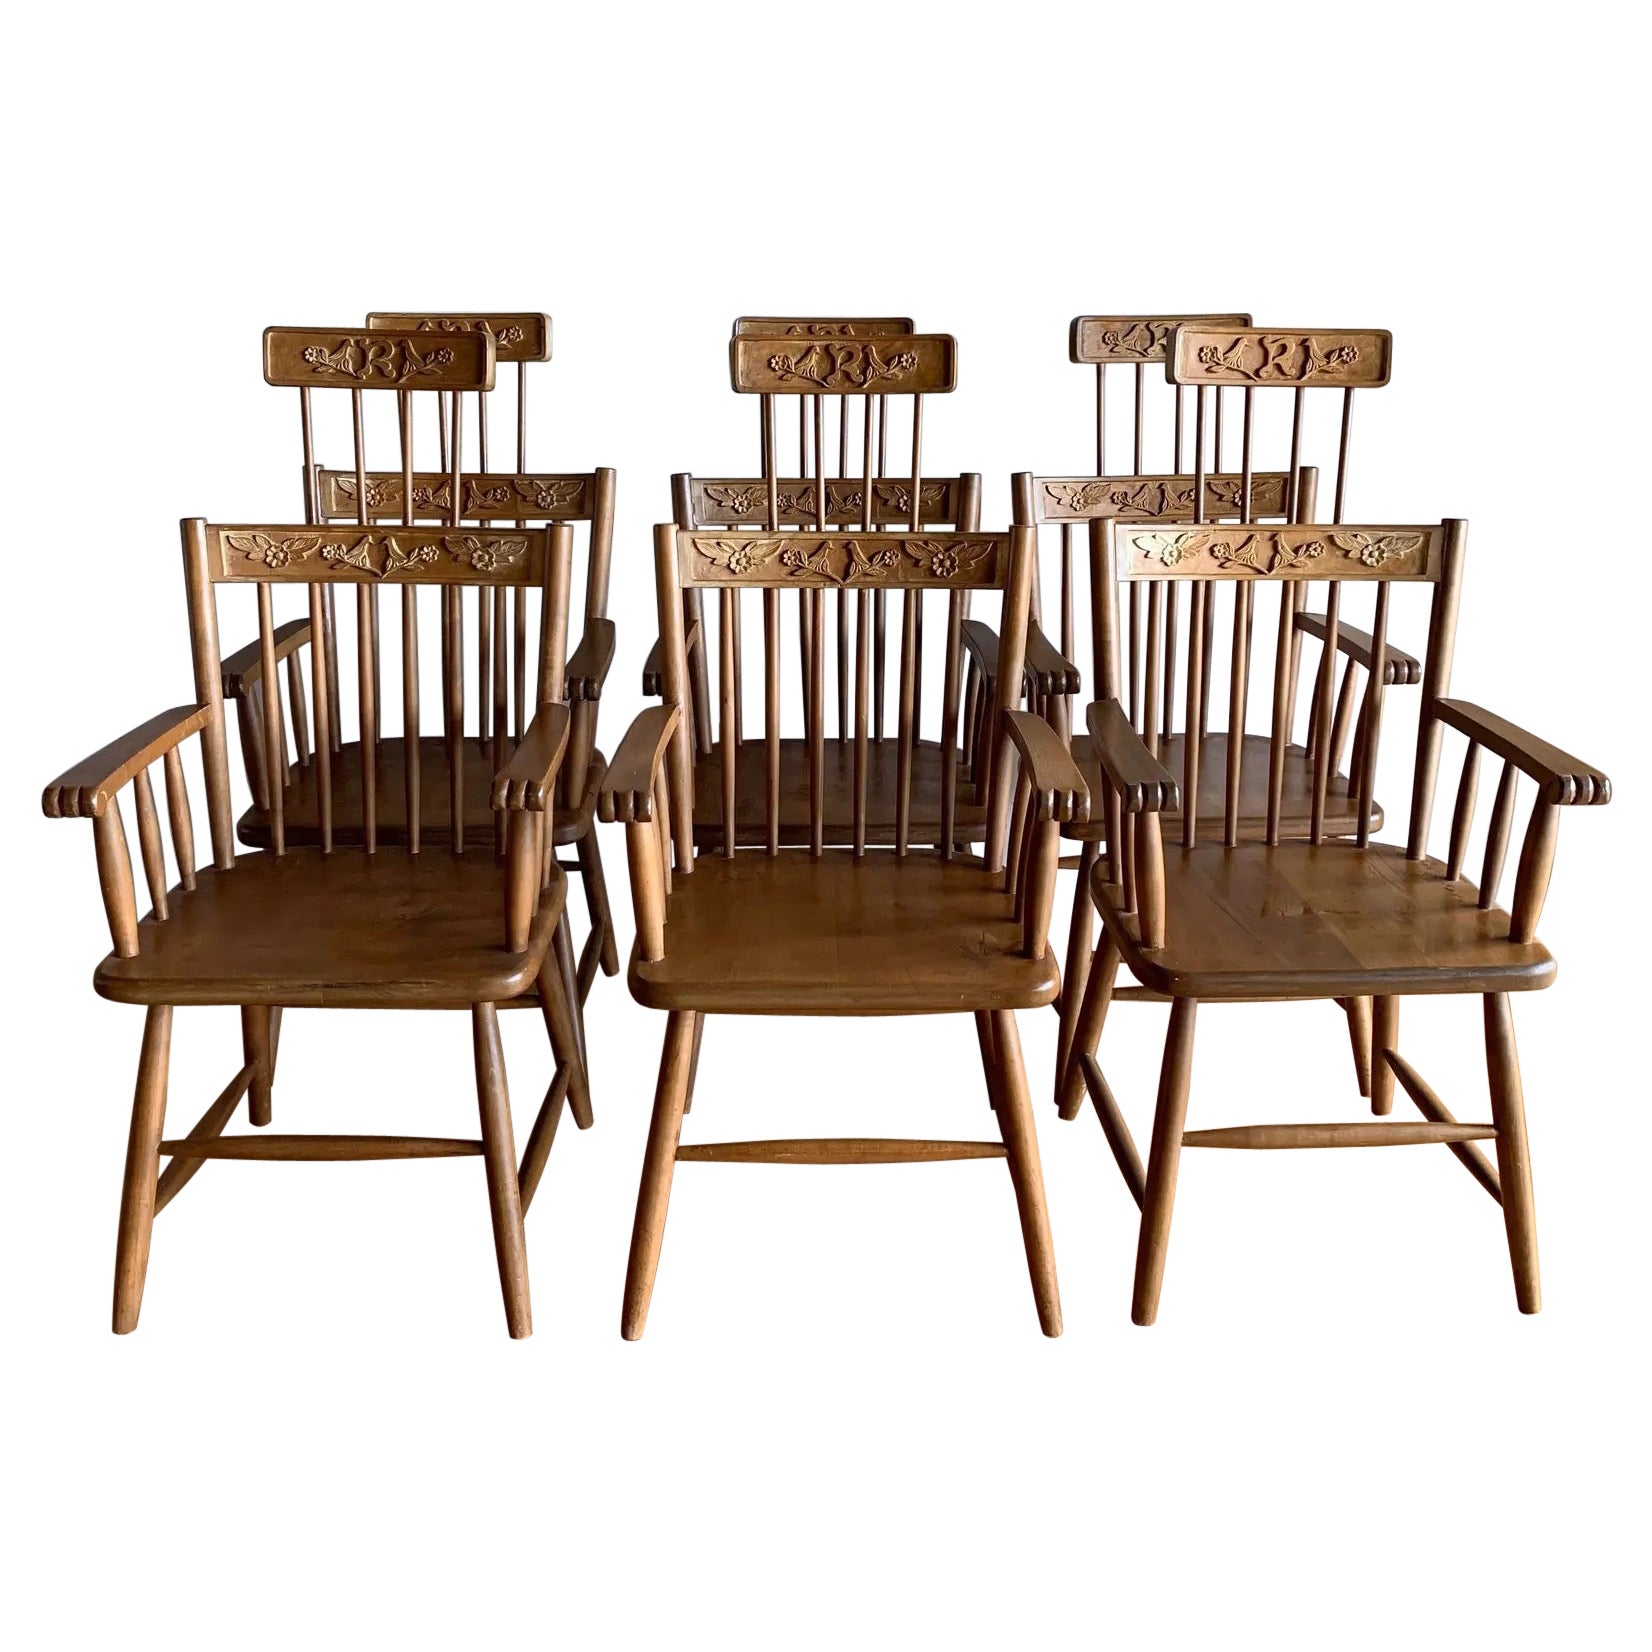 Vintage Hand Carved Spindle Birdcage Cage Back Chairs Flowers Birds-set of 6 For Sale